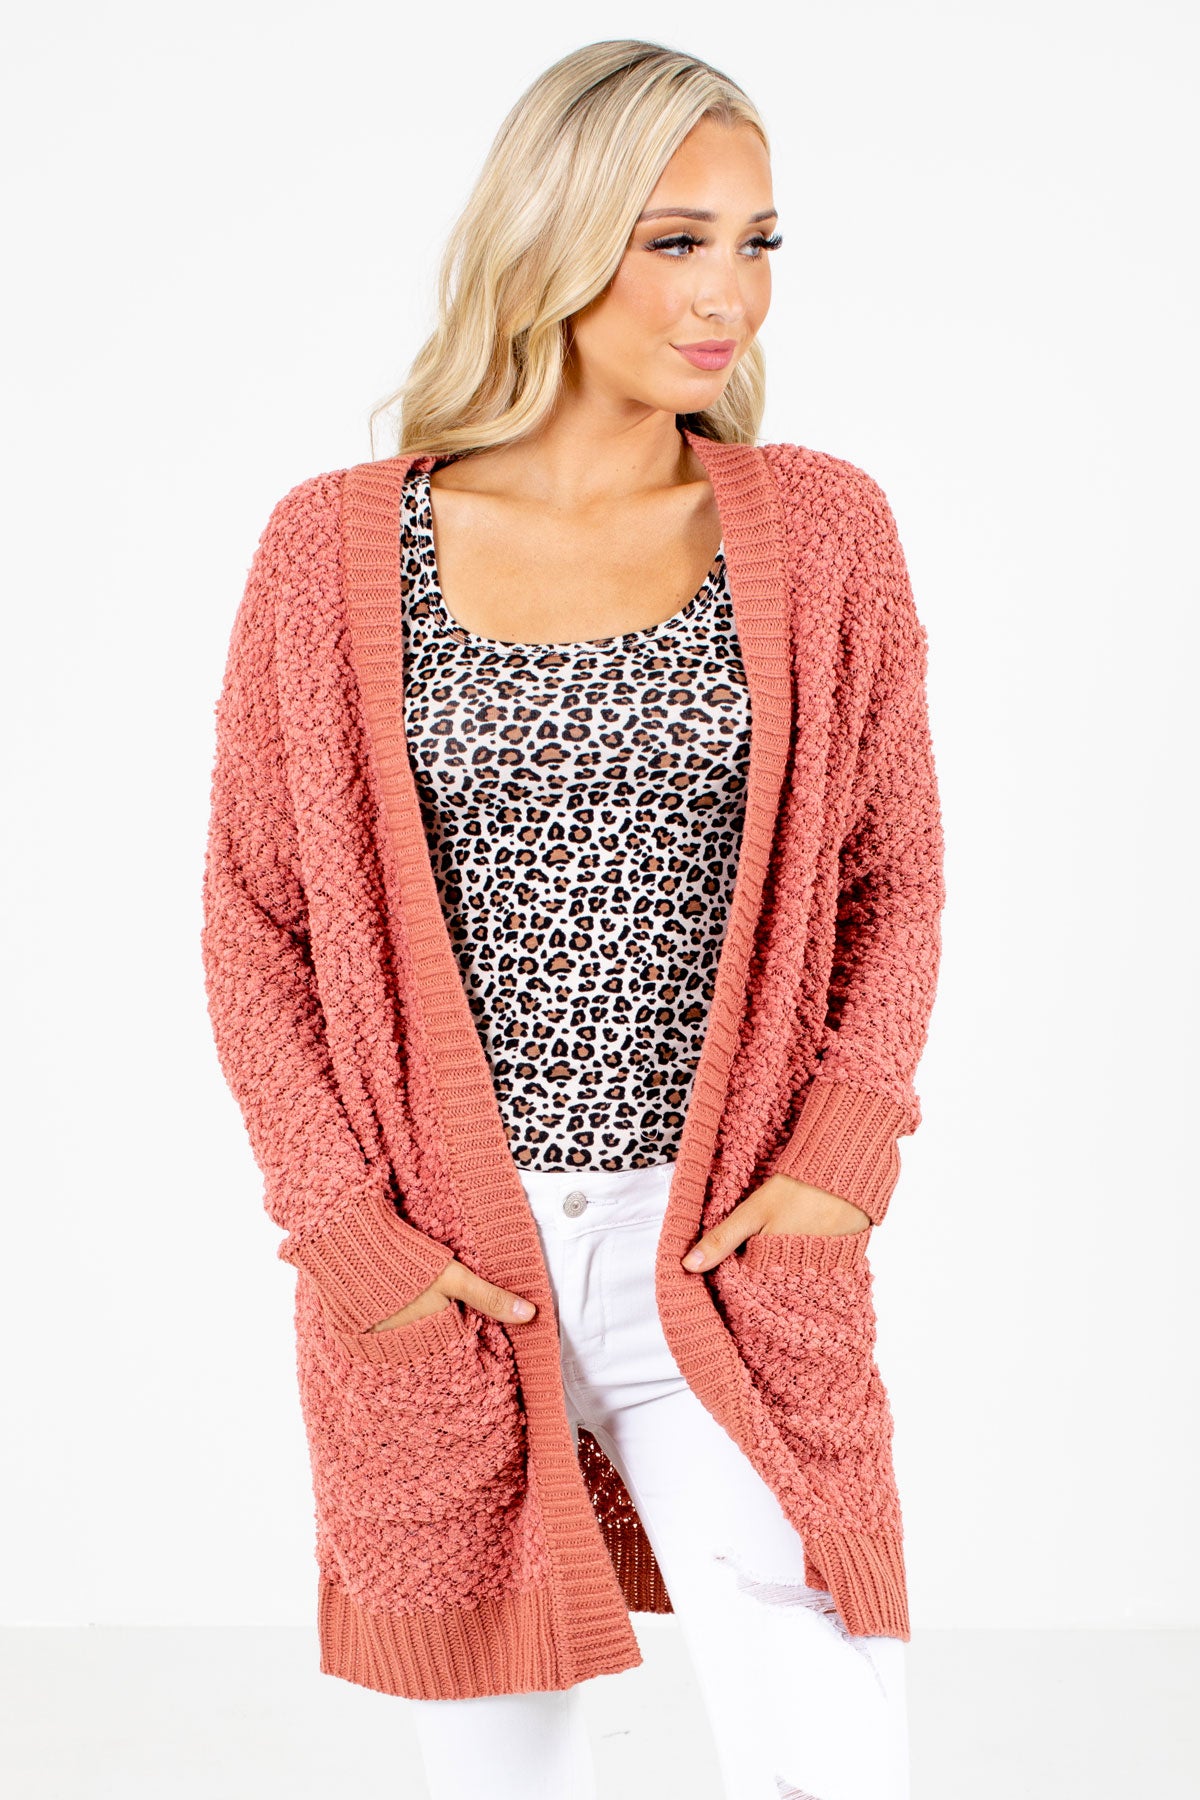 Pink Popcorn Knit Material Boutique Cardigans for Women